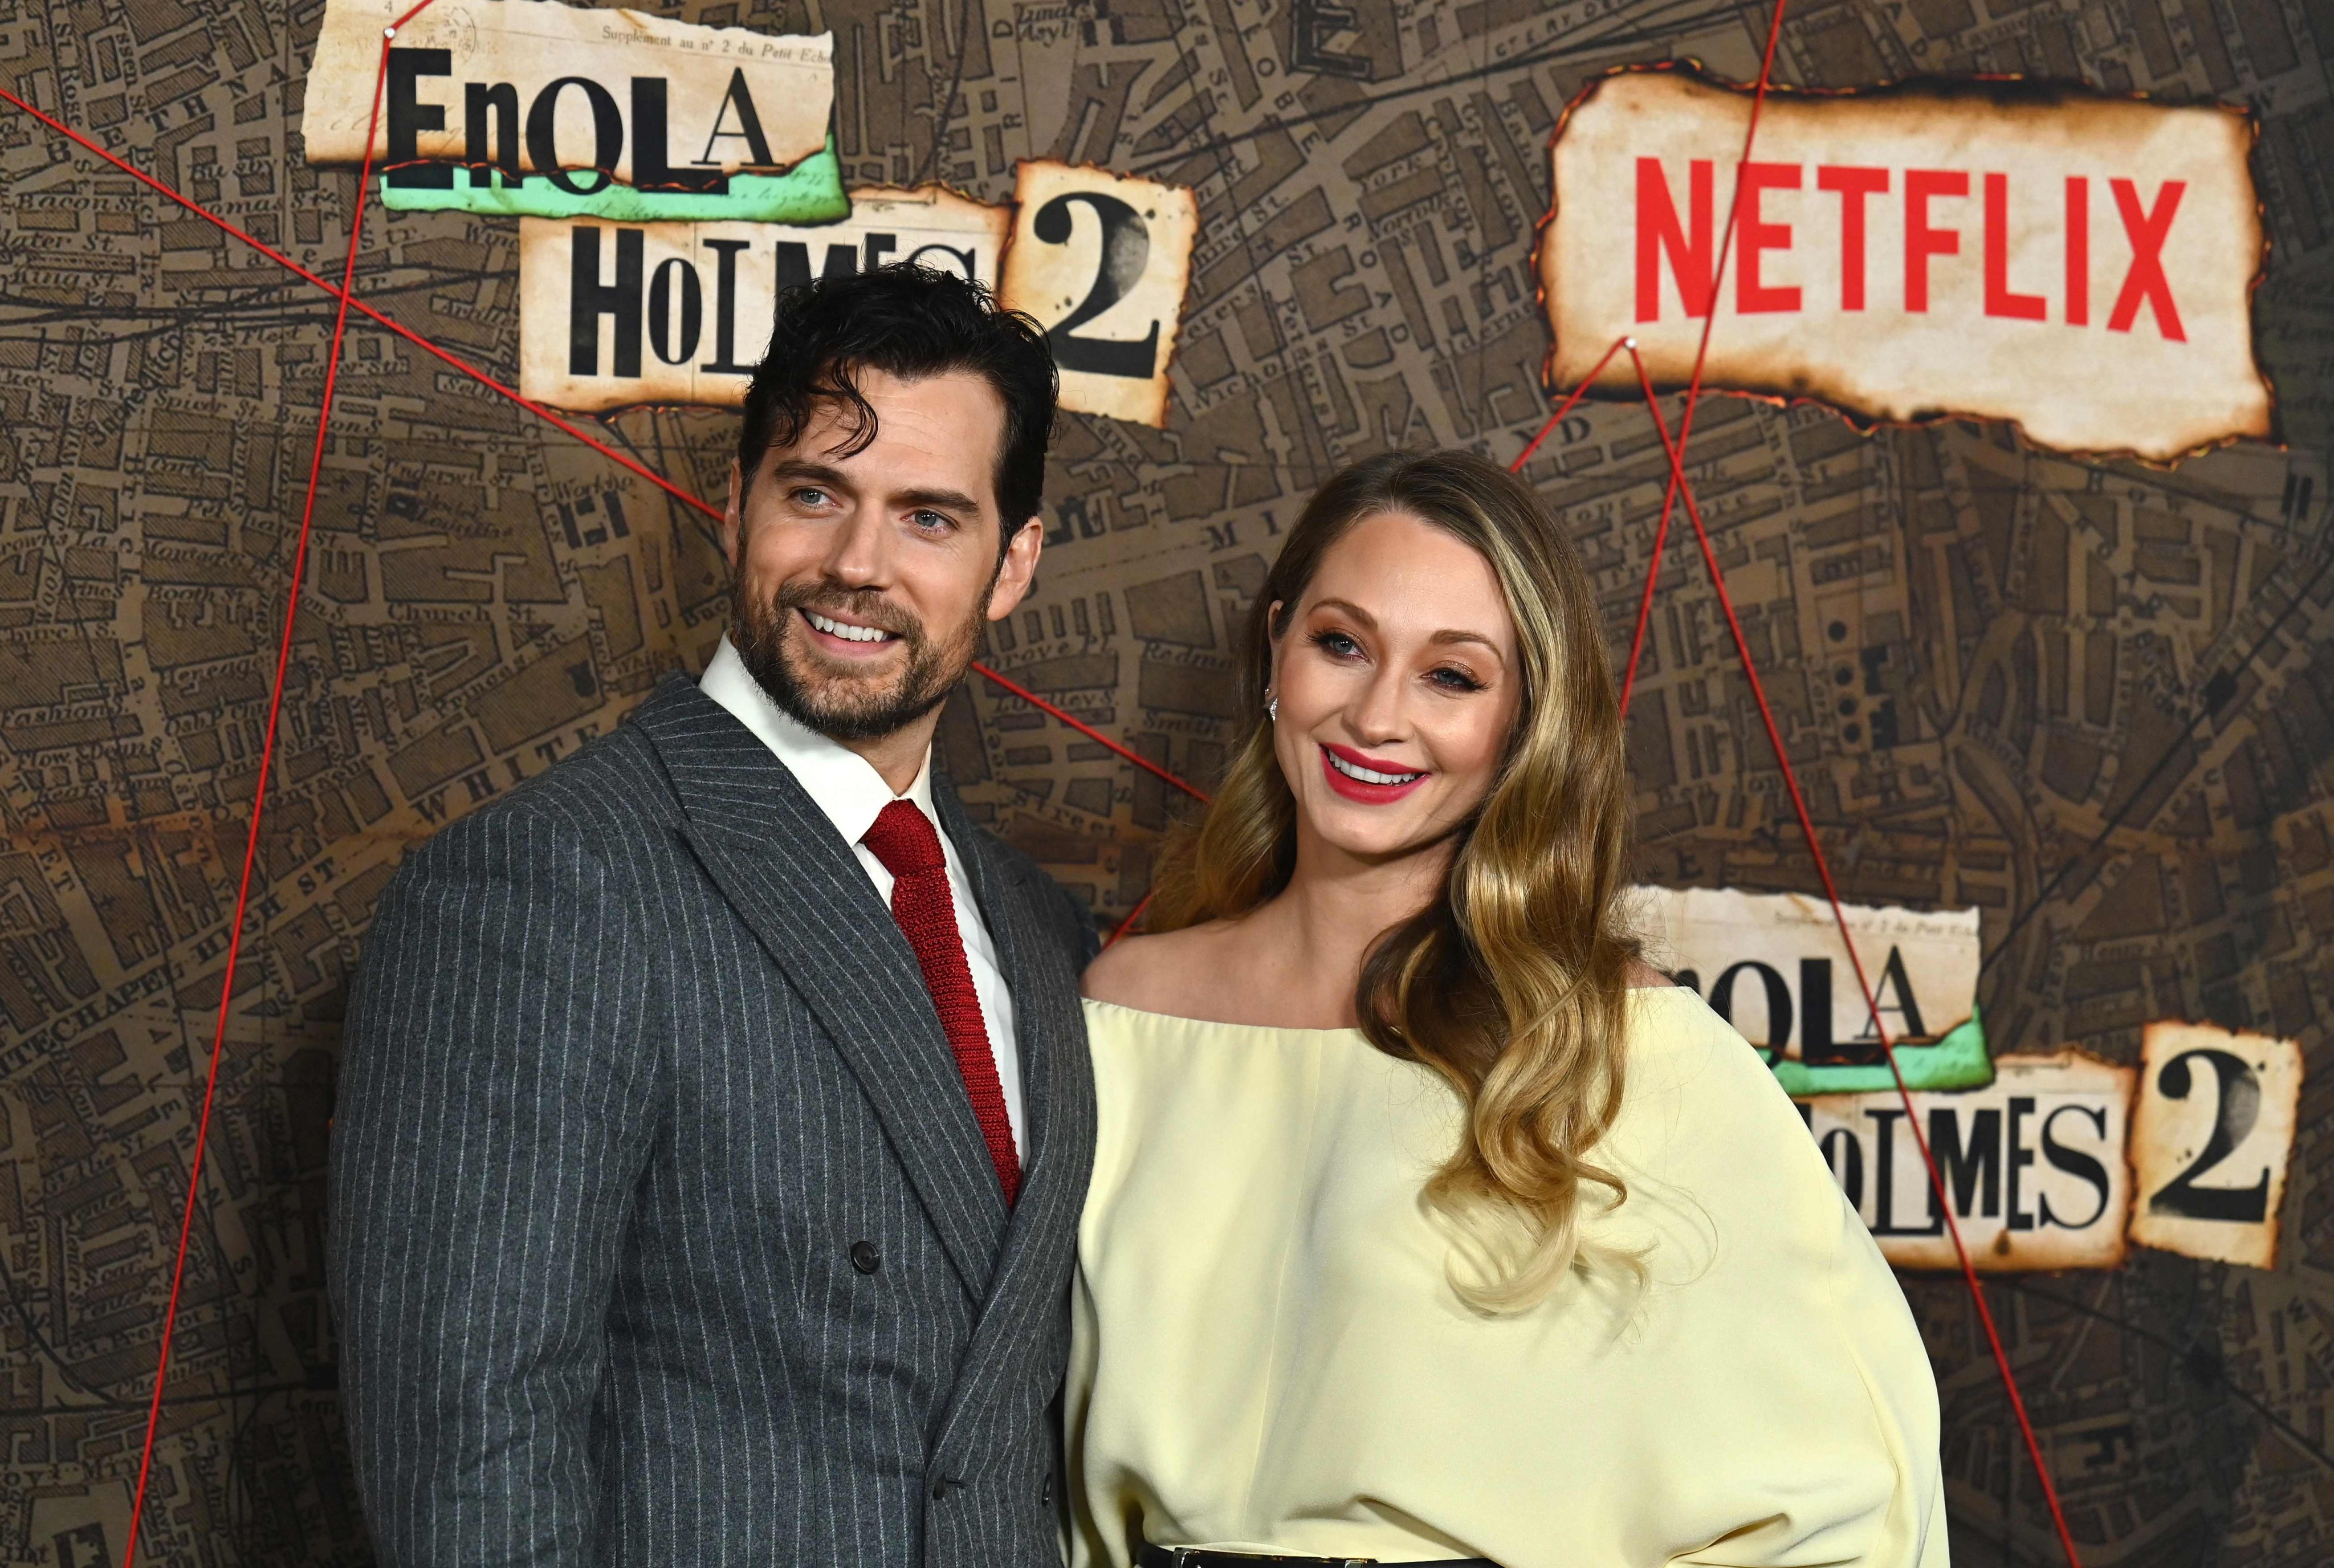 British actor Henry Cavill and his girlfriend Natalie Viscuso arrive for the premiere of Netflix’s Enola Holmes 2 at The Paris Theatre in New York City, on October 27. Photo: AFP